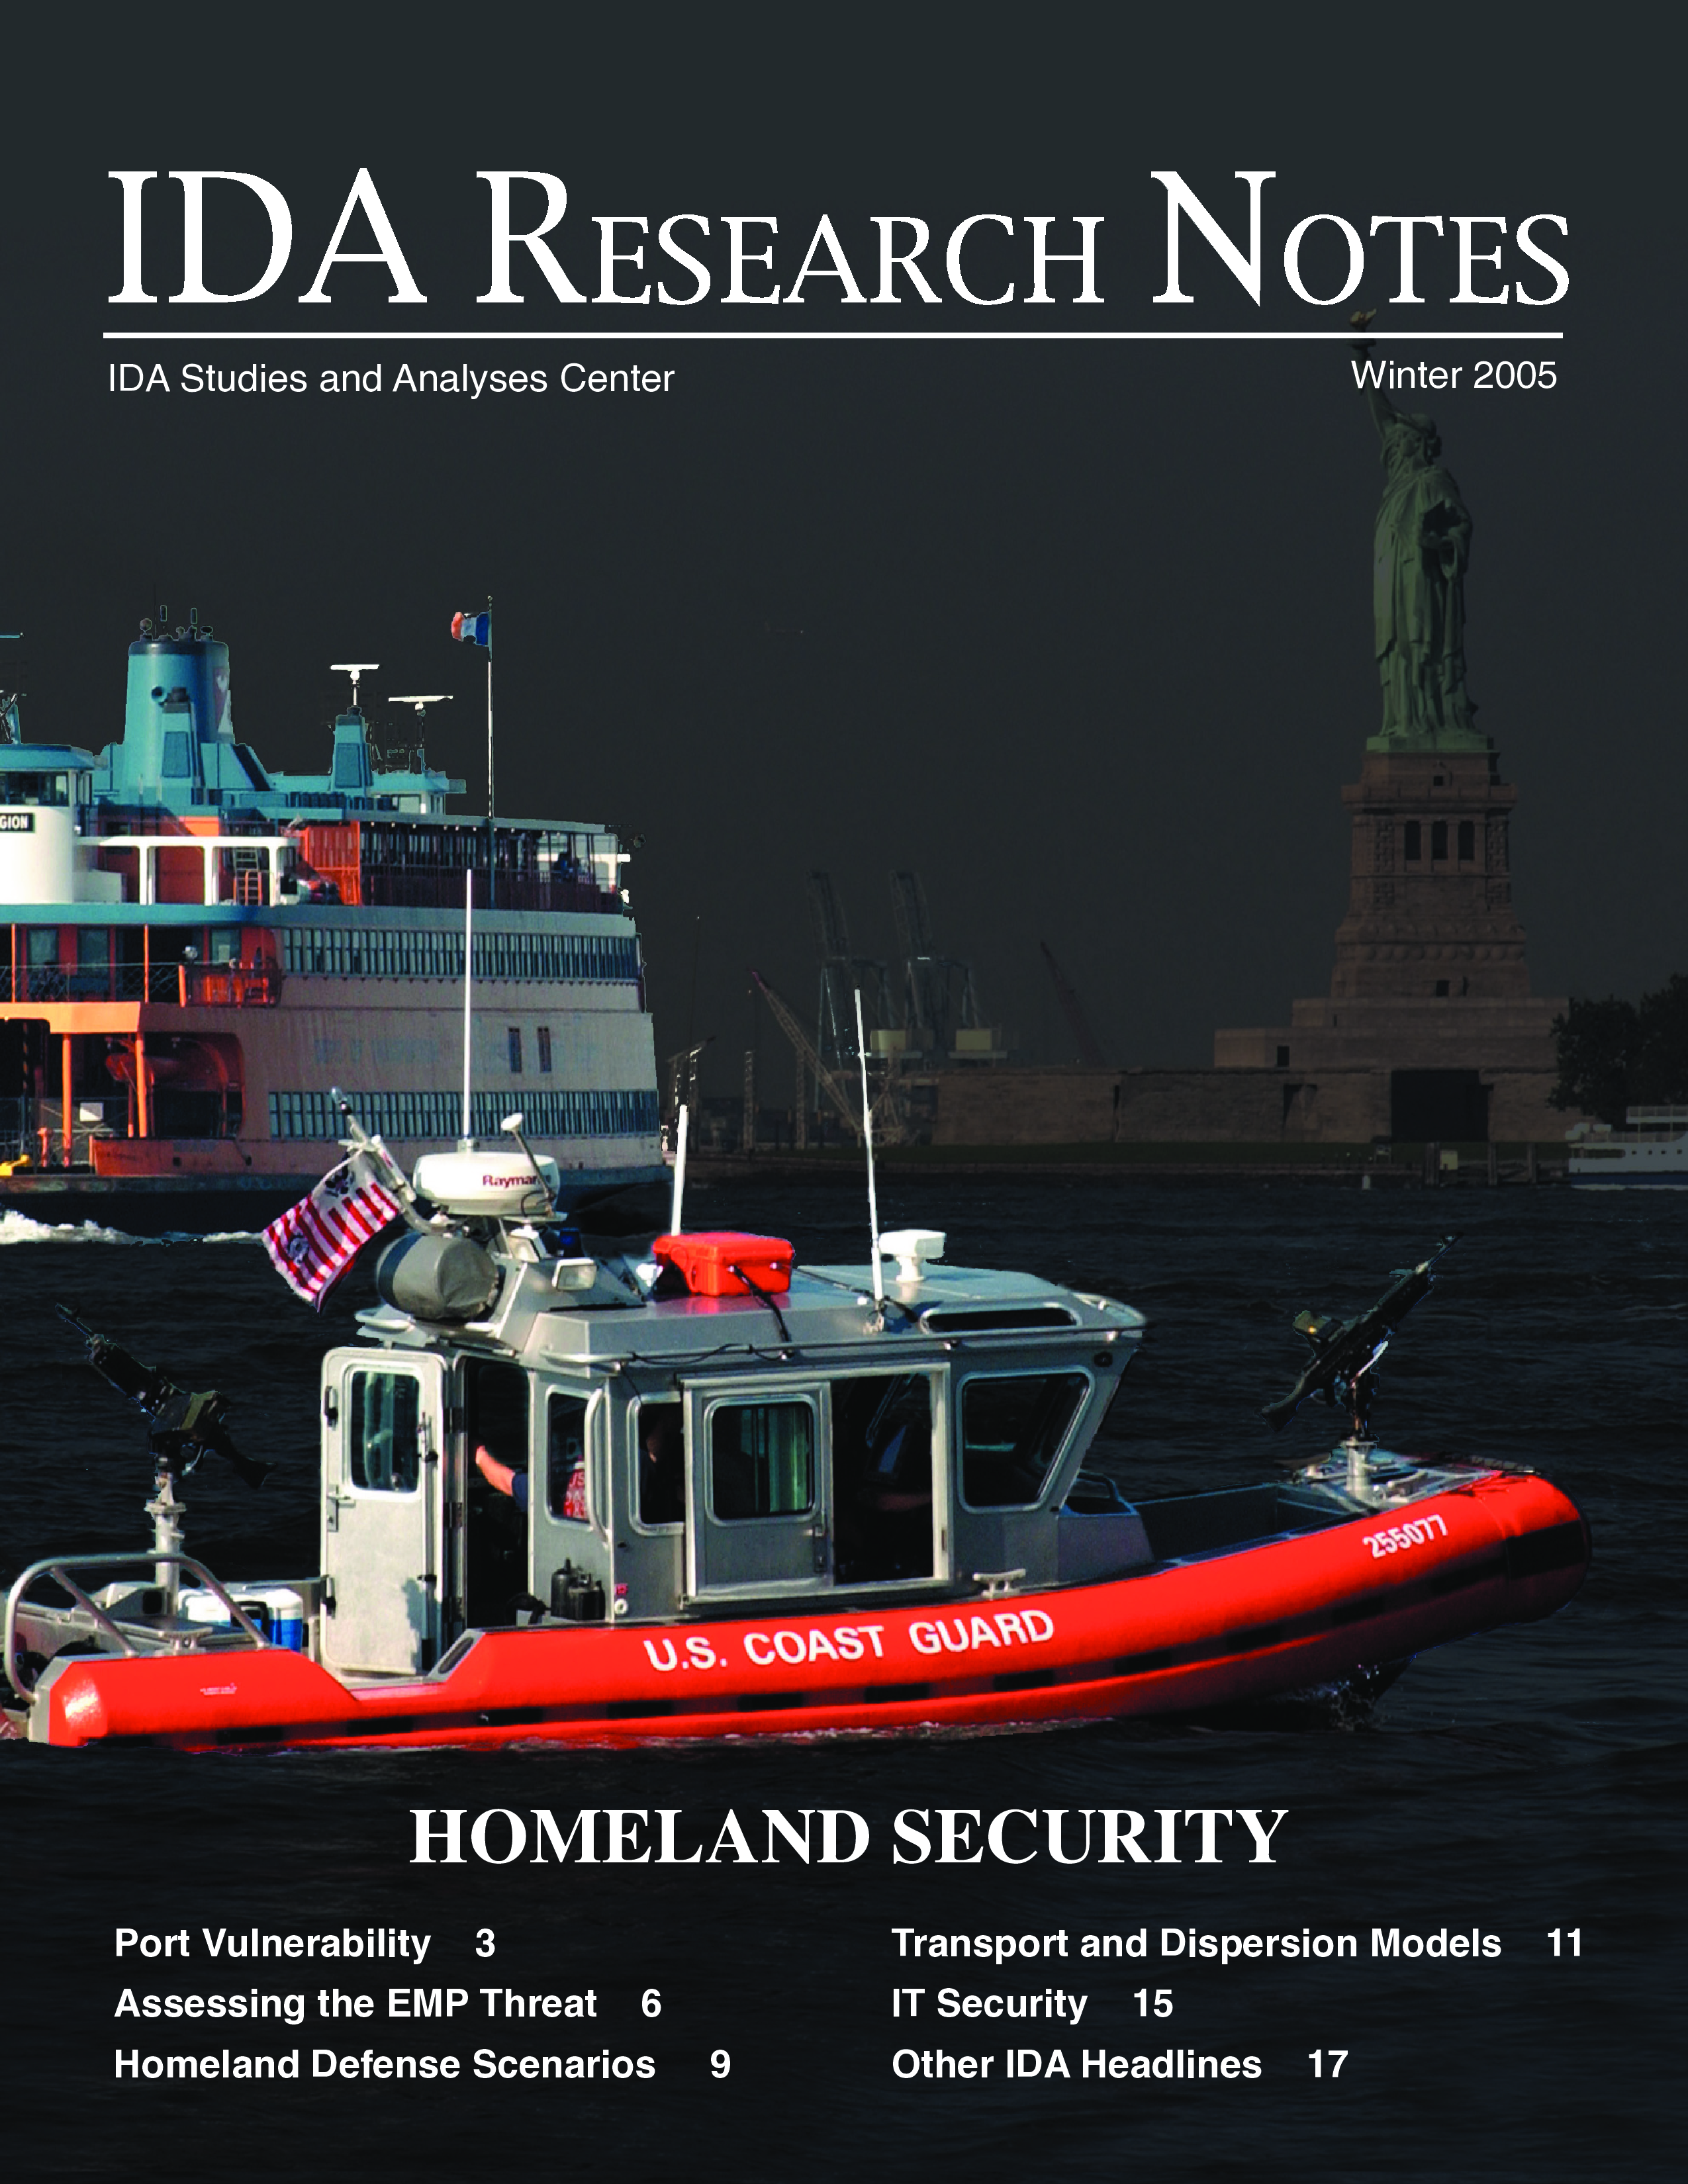 Research Notes Homeland Security